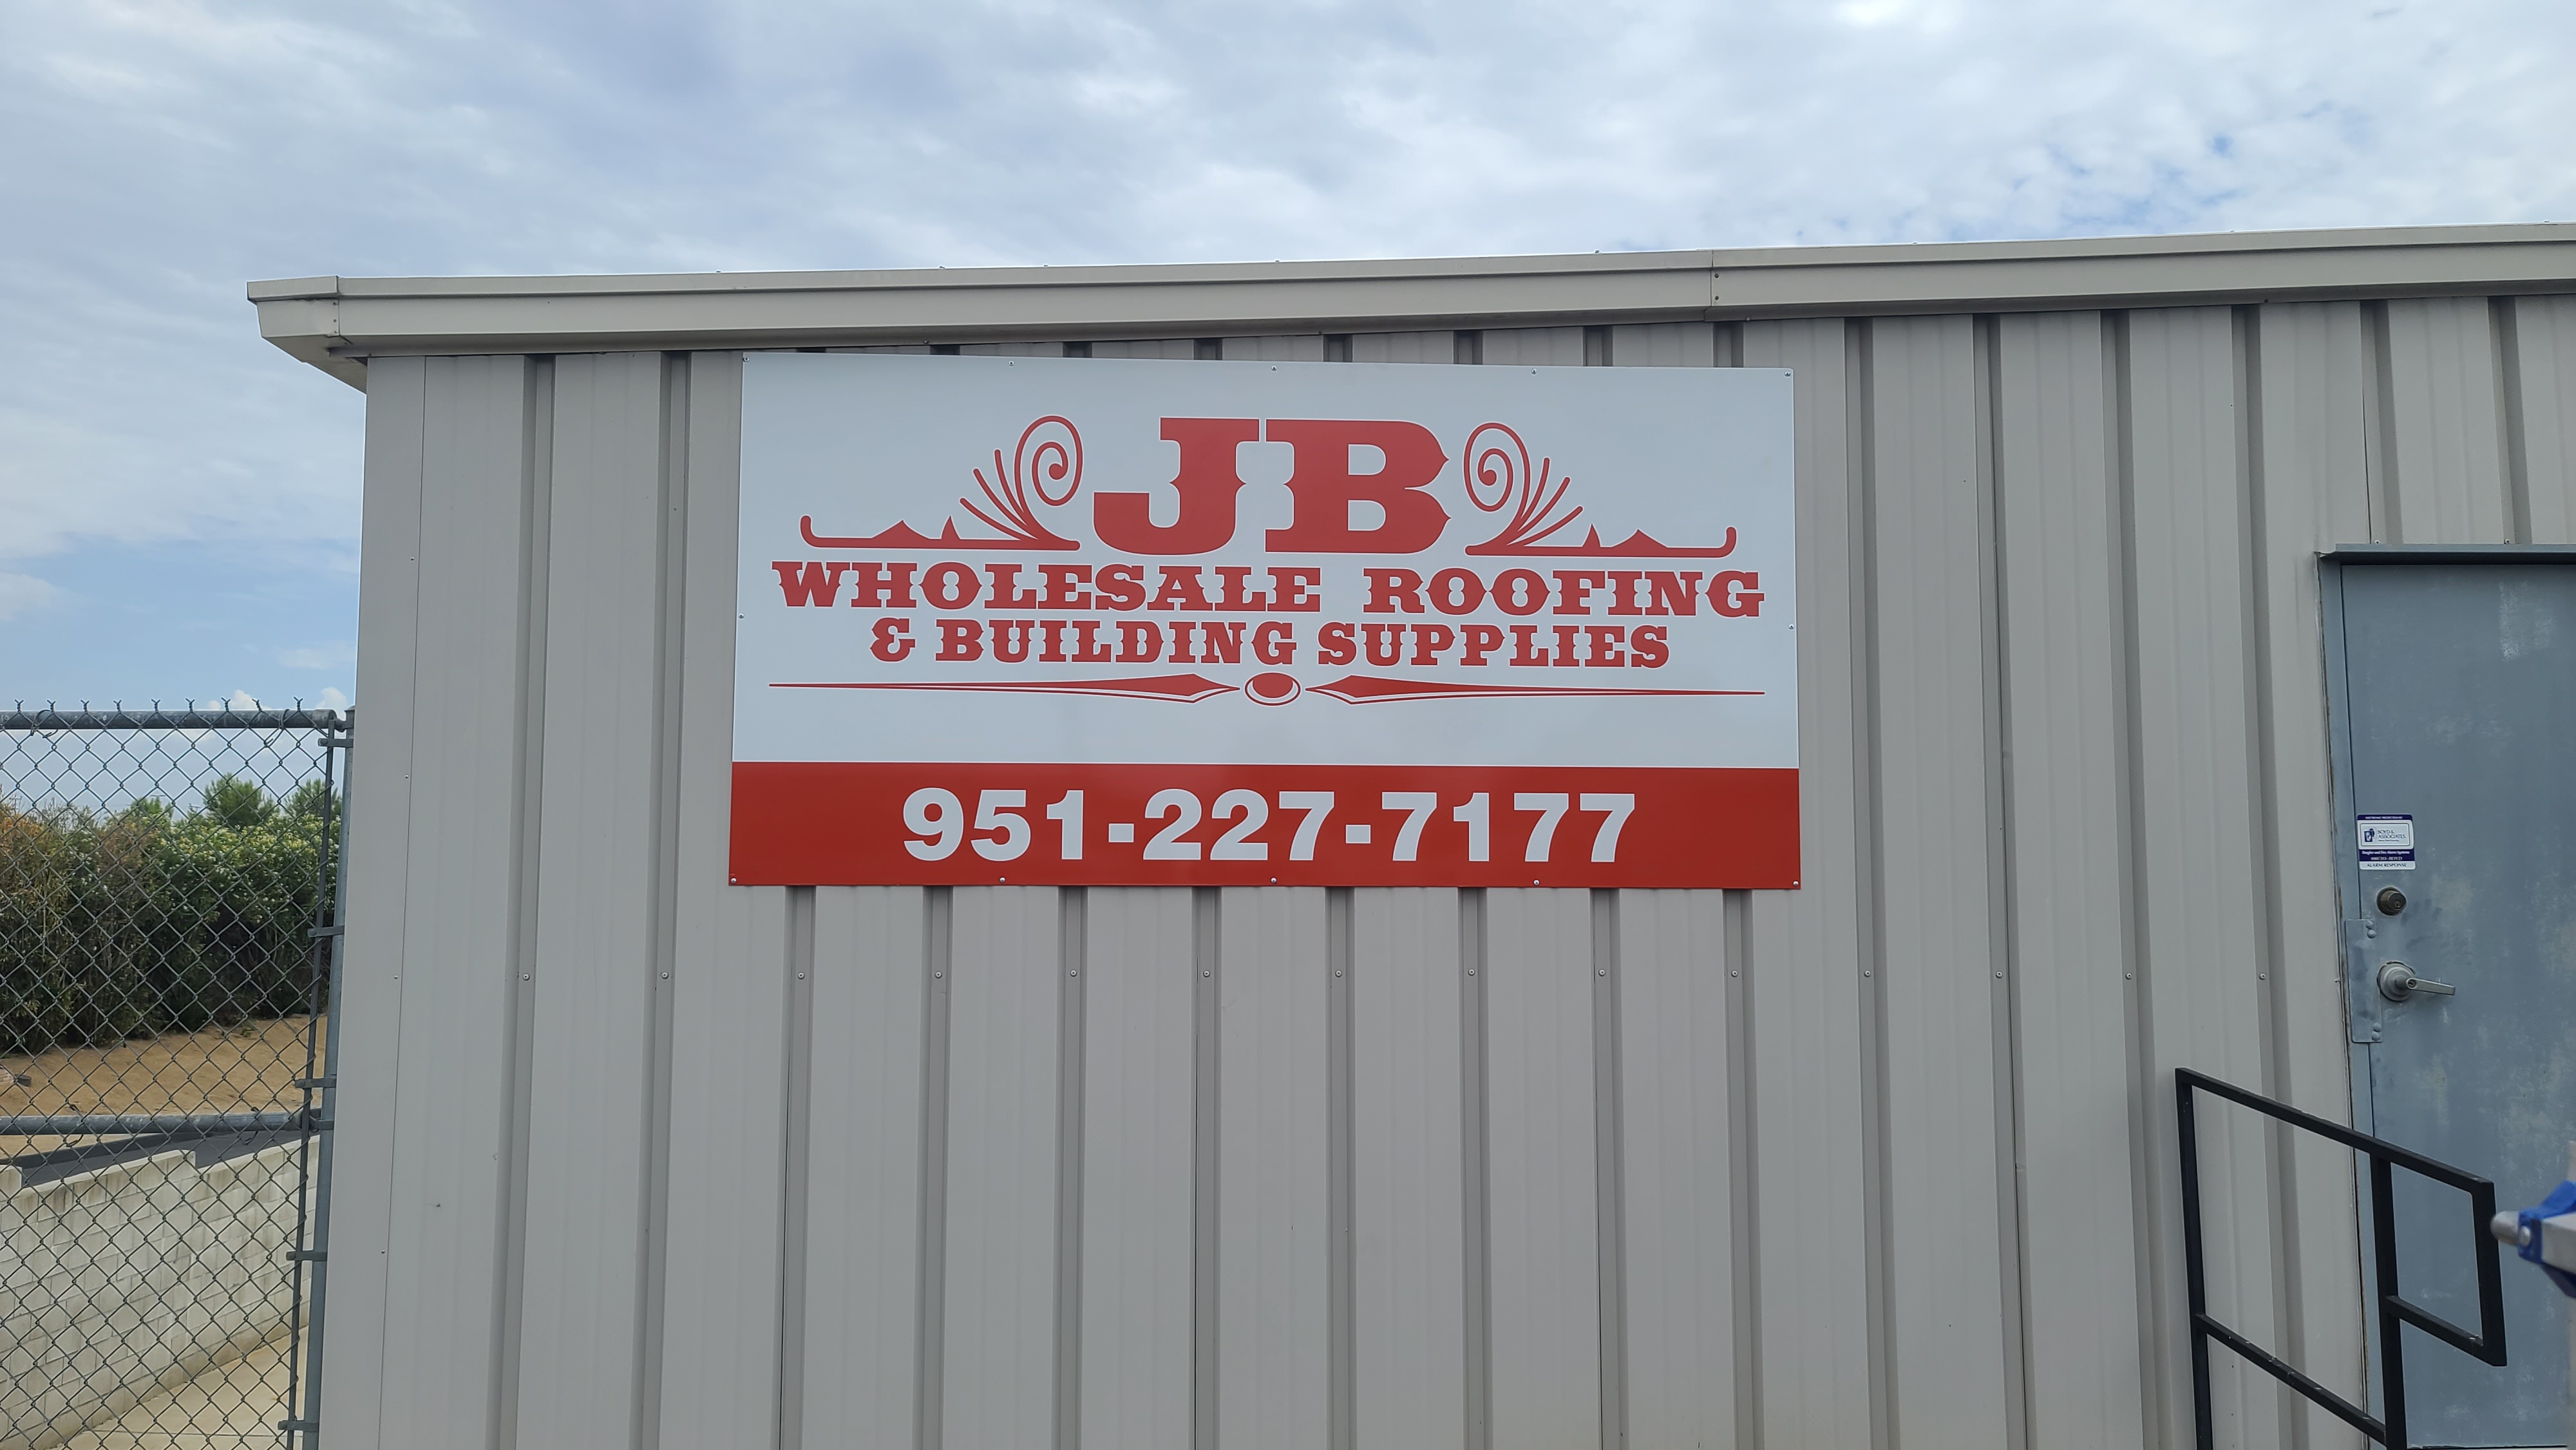 This metal panel sign for JB Wholesale Roofing's parking lot in Murietta features their logo and contact details, giving their brand more visibility.